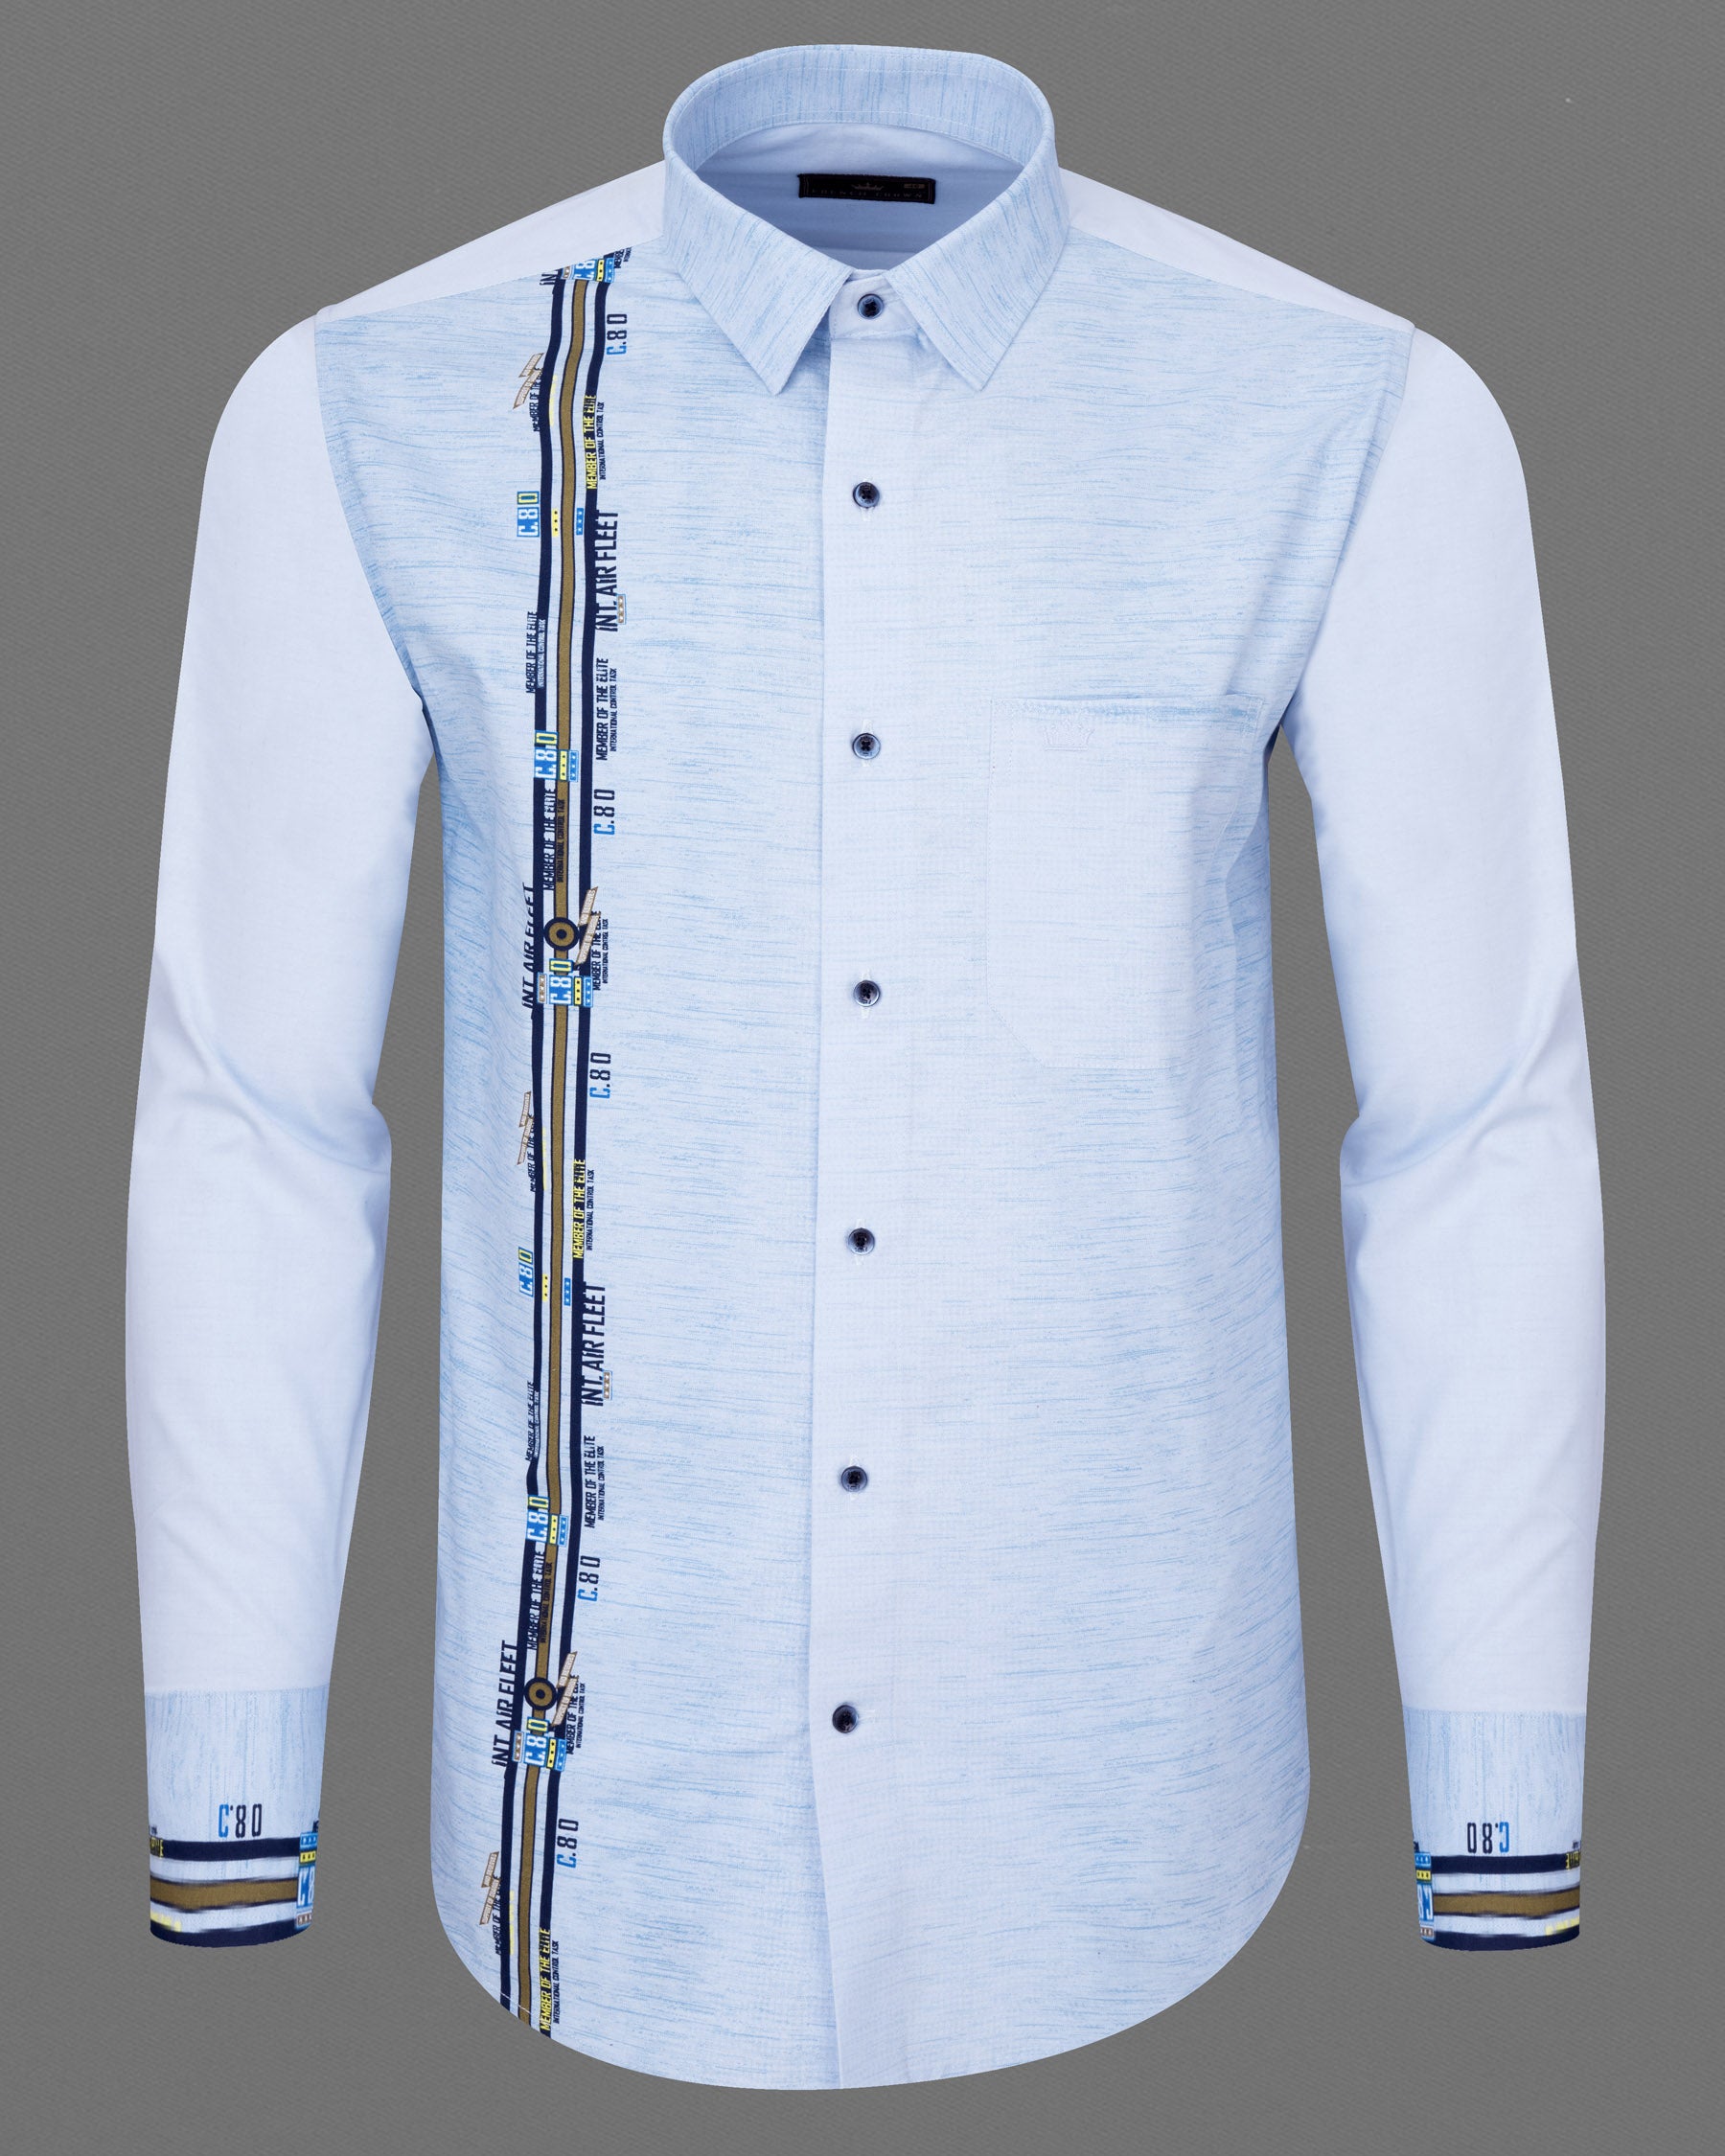 Tropical Blue with Striped Chambray Shirt 7395-BLE-38,7395-BLE-38,7395-BLE-39,7395-BLE-39,7395-BLE-40,7395-BLE-40,7395-BLE-42,7395-BLE-42,7395-BLE-44,7395-BLE-44,7395-BLE-46,7395-BLE-46,7395-BLE-48,7395-BLE-48,7395-BLE-50,7395-BLE-50,7395-BLE-52,7395-BLE-52